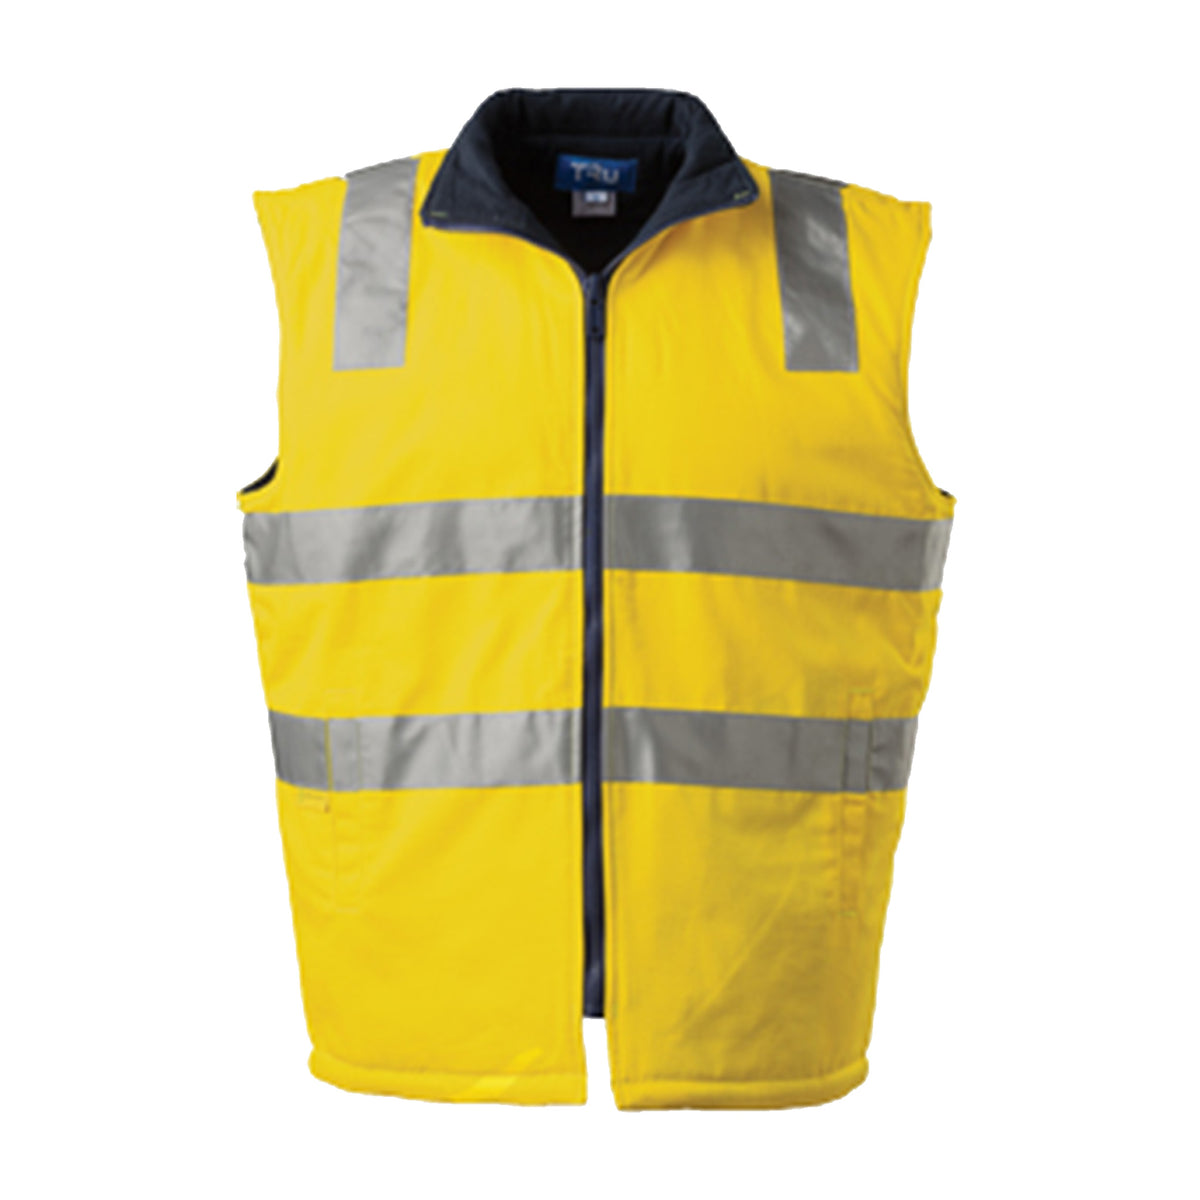 yellow mid weight cotton canvas vest with 3m tape